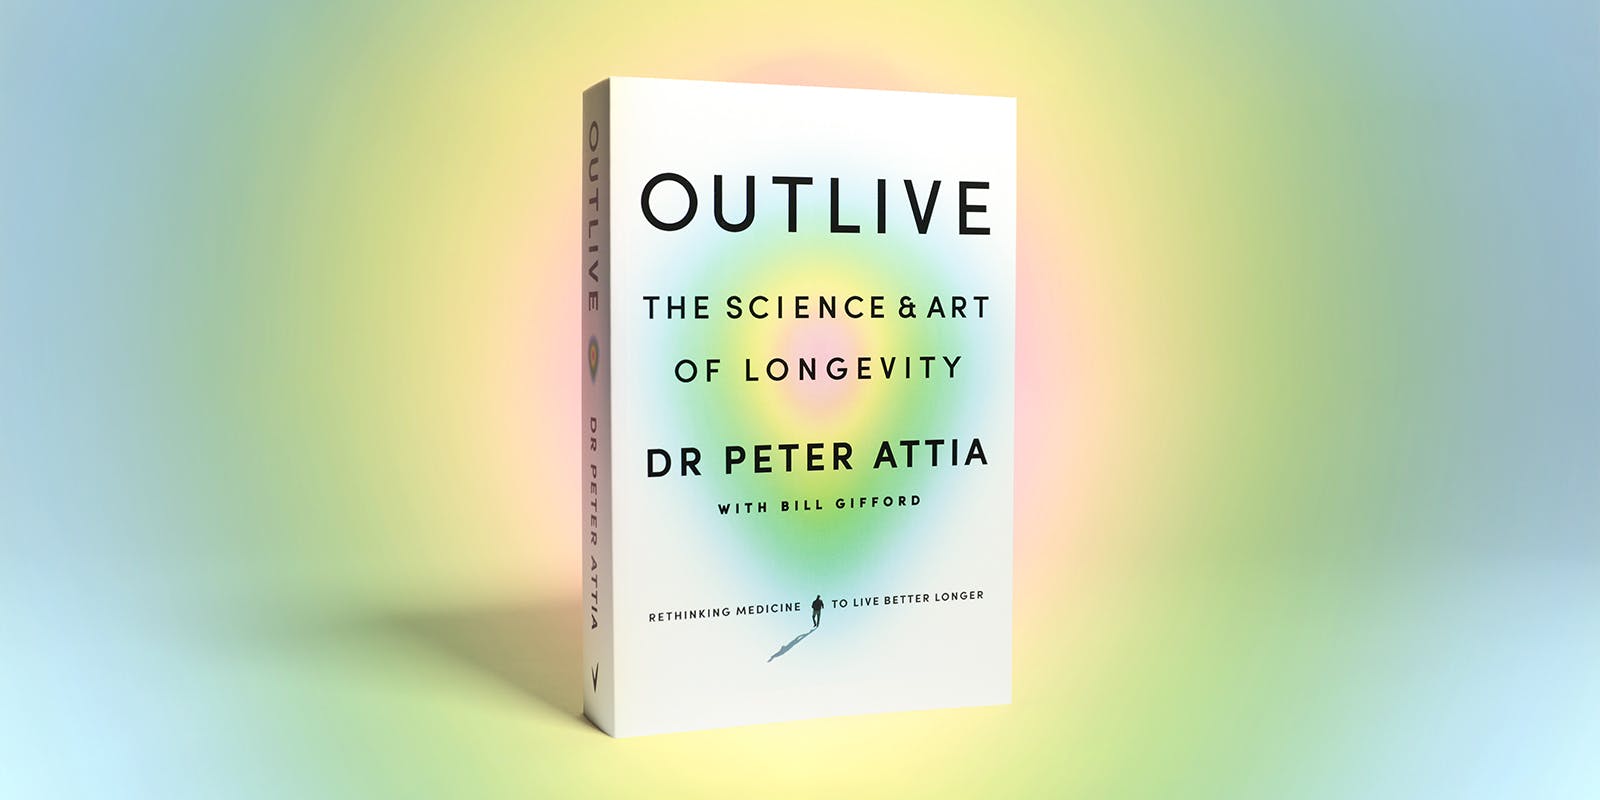 Dr Peter Attia shares what you should (and shouldn't) eat for a longer life